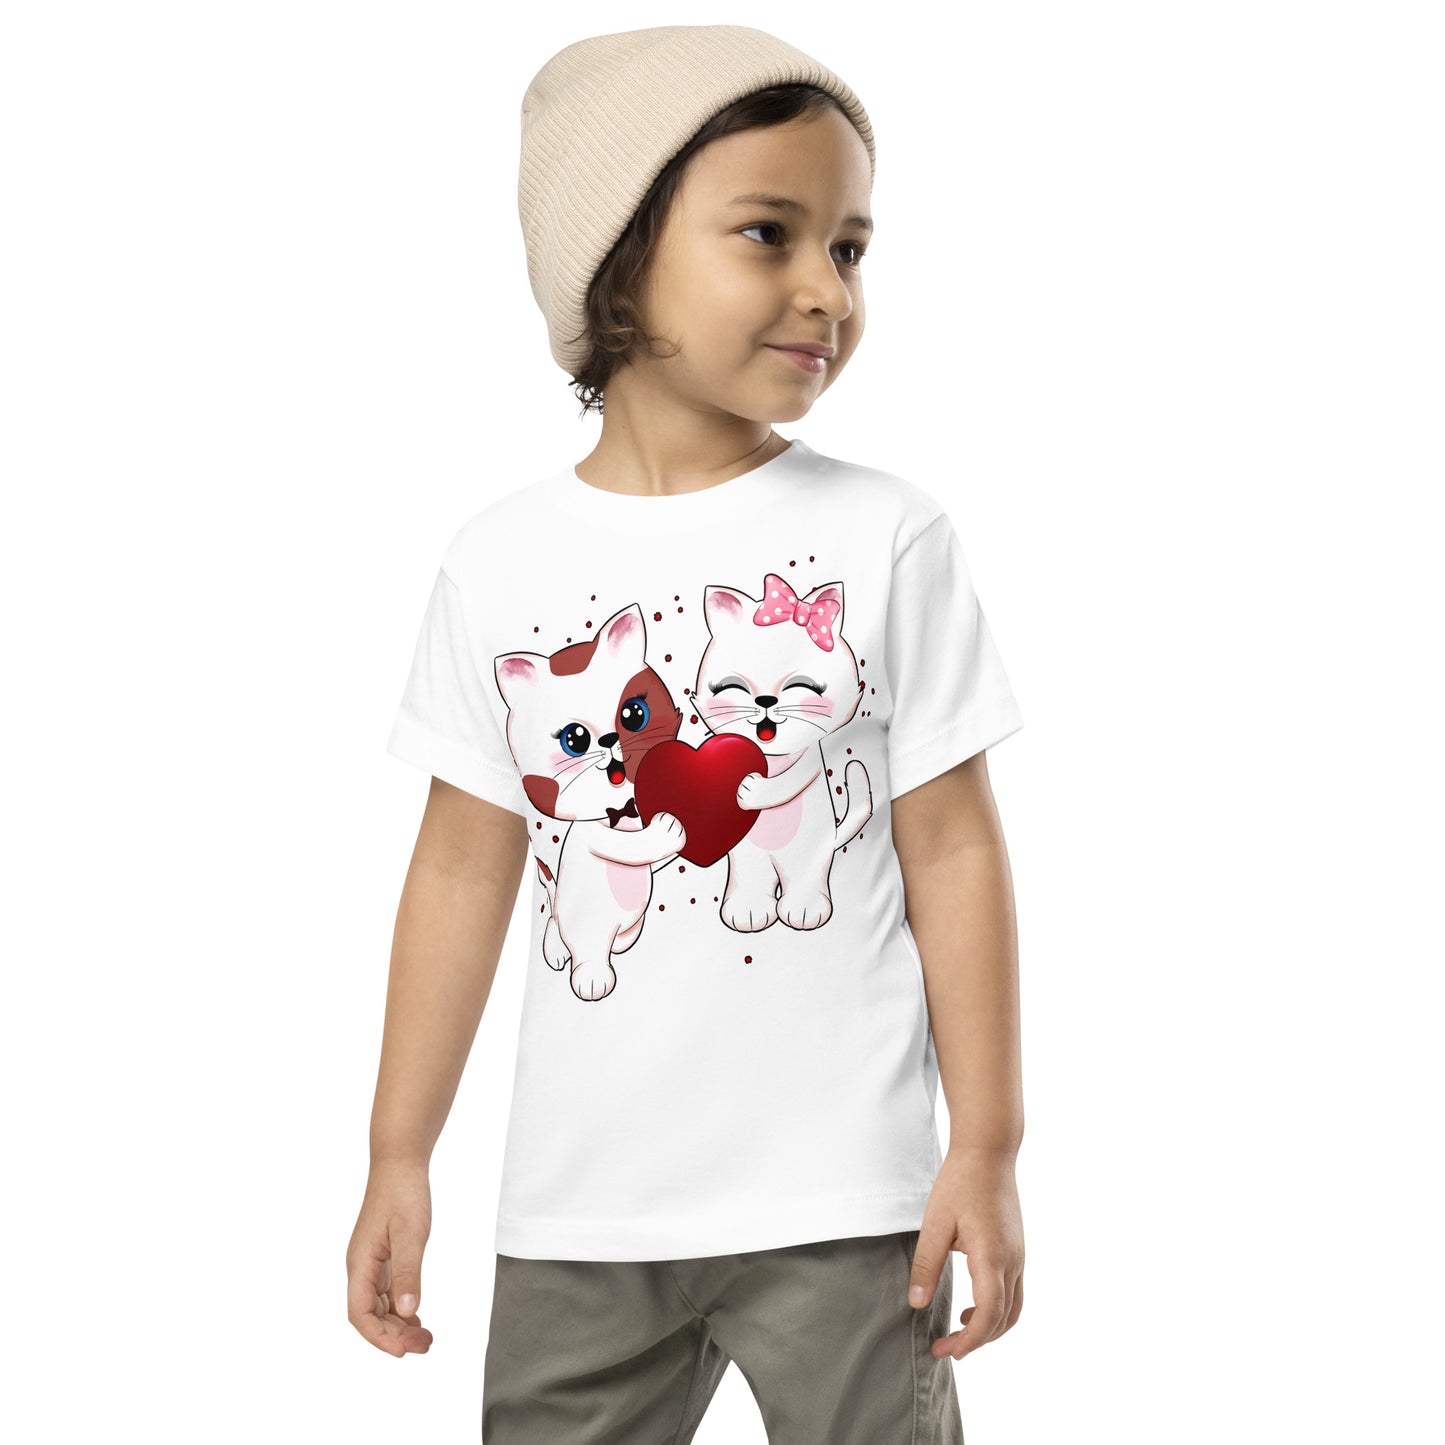 Cute Couple Cats in Love T-shirt, No. 0289